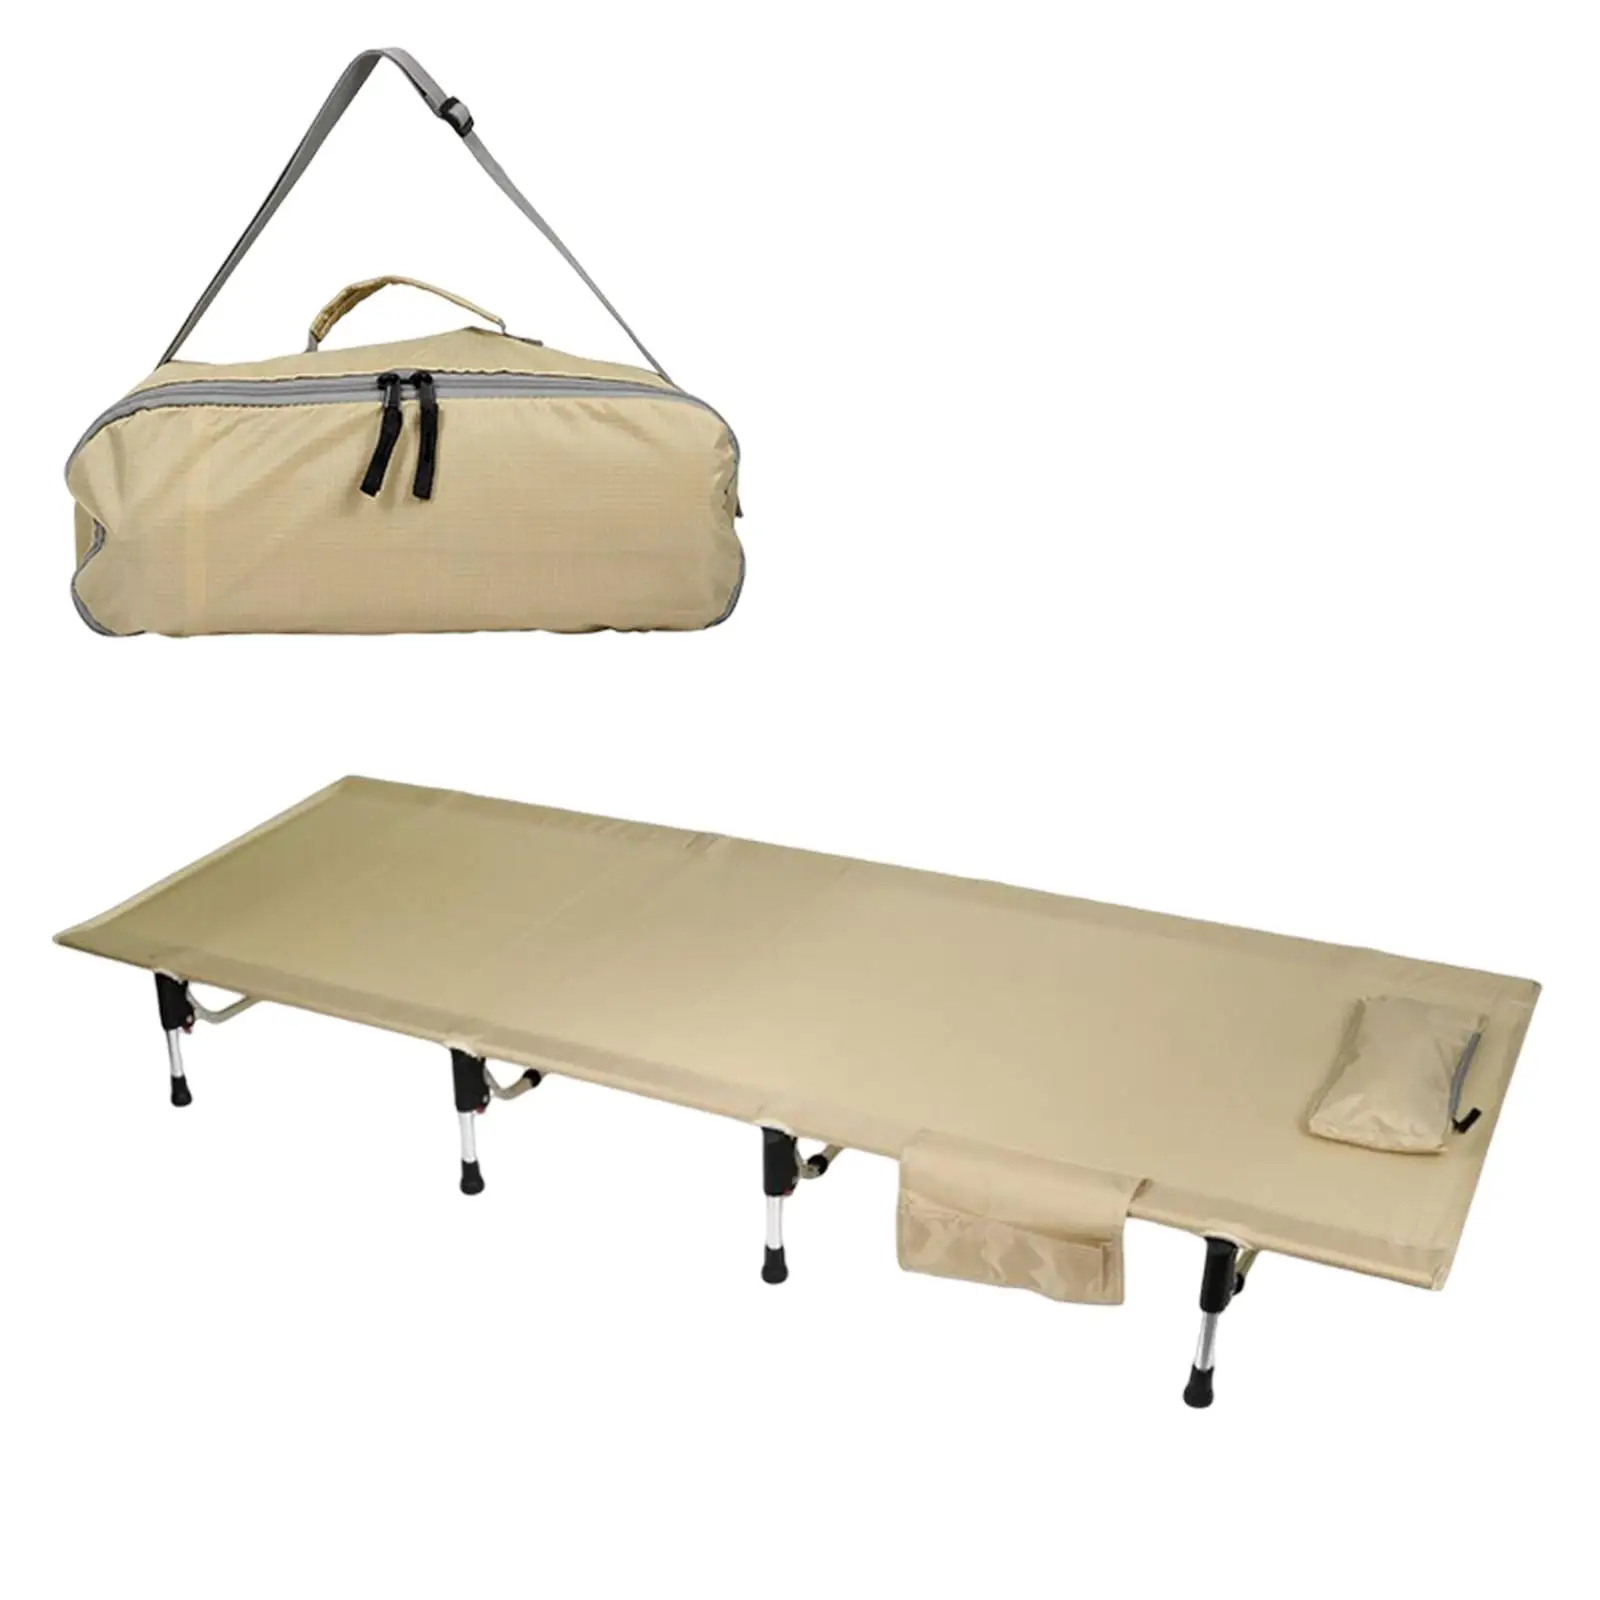 72.8inch Folding Camping Cot with Shoulder Bag Lightweight 26